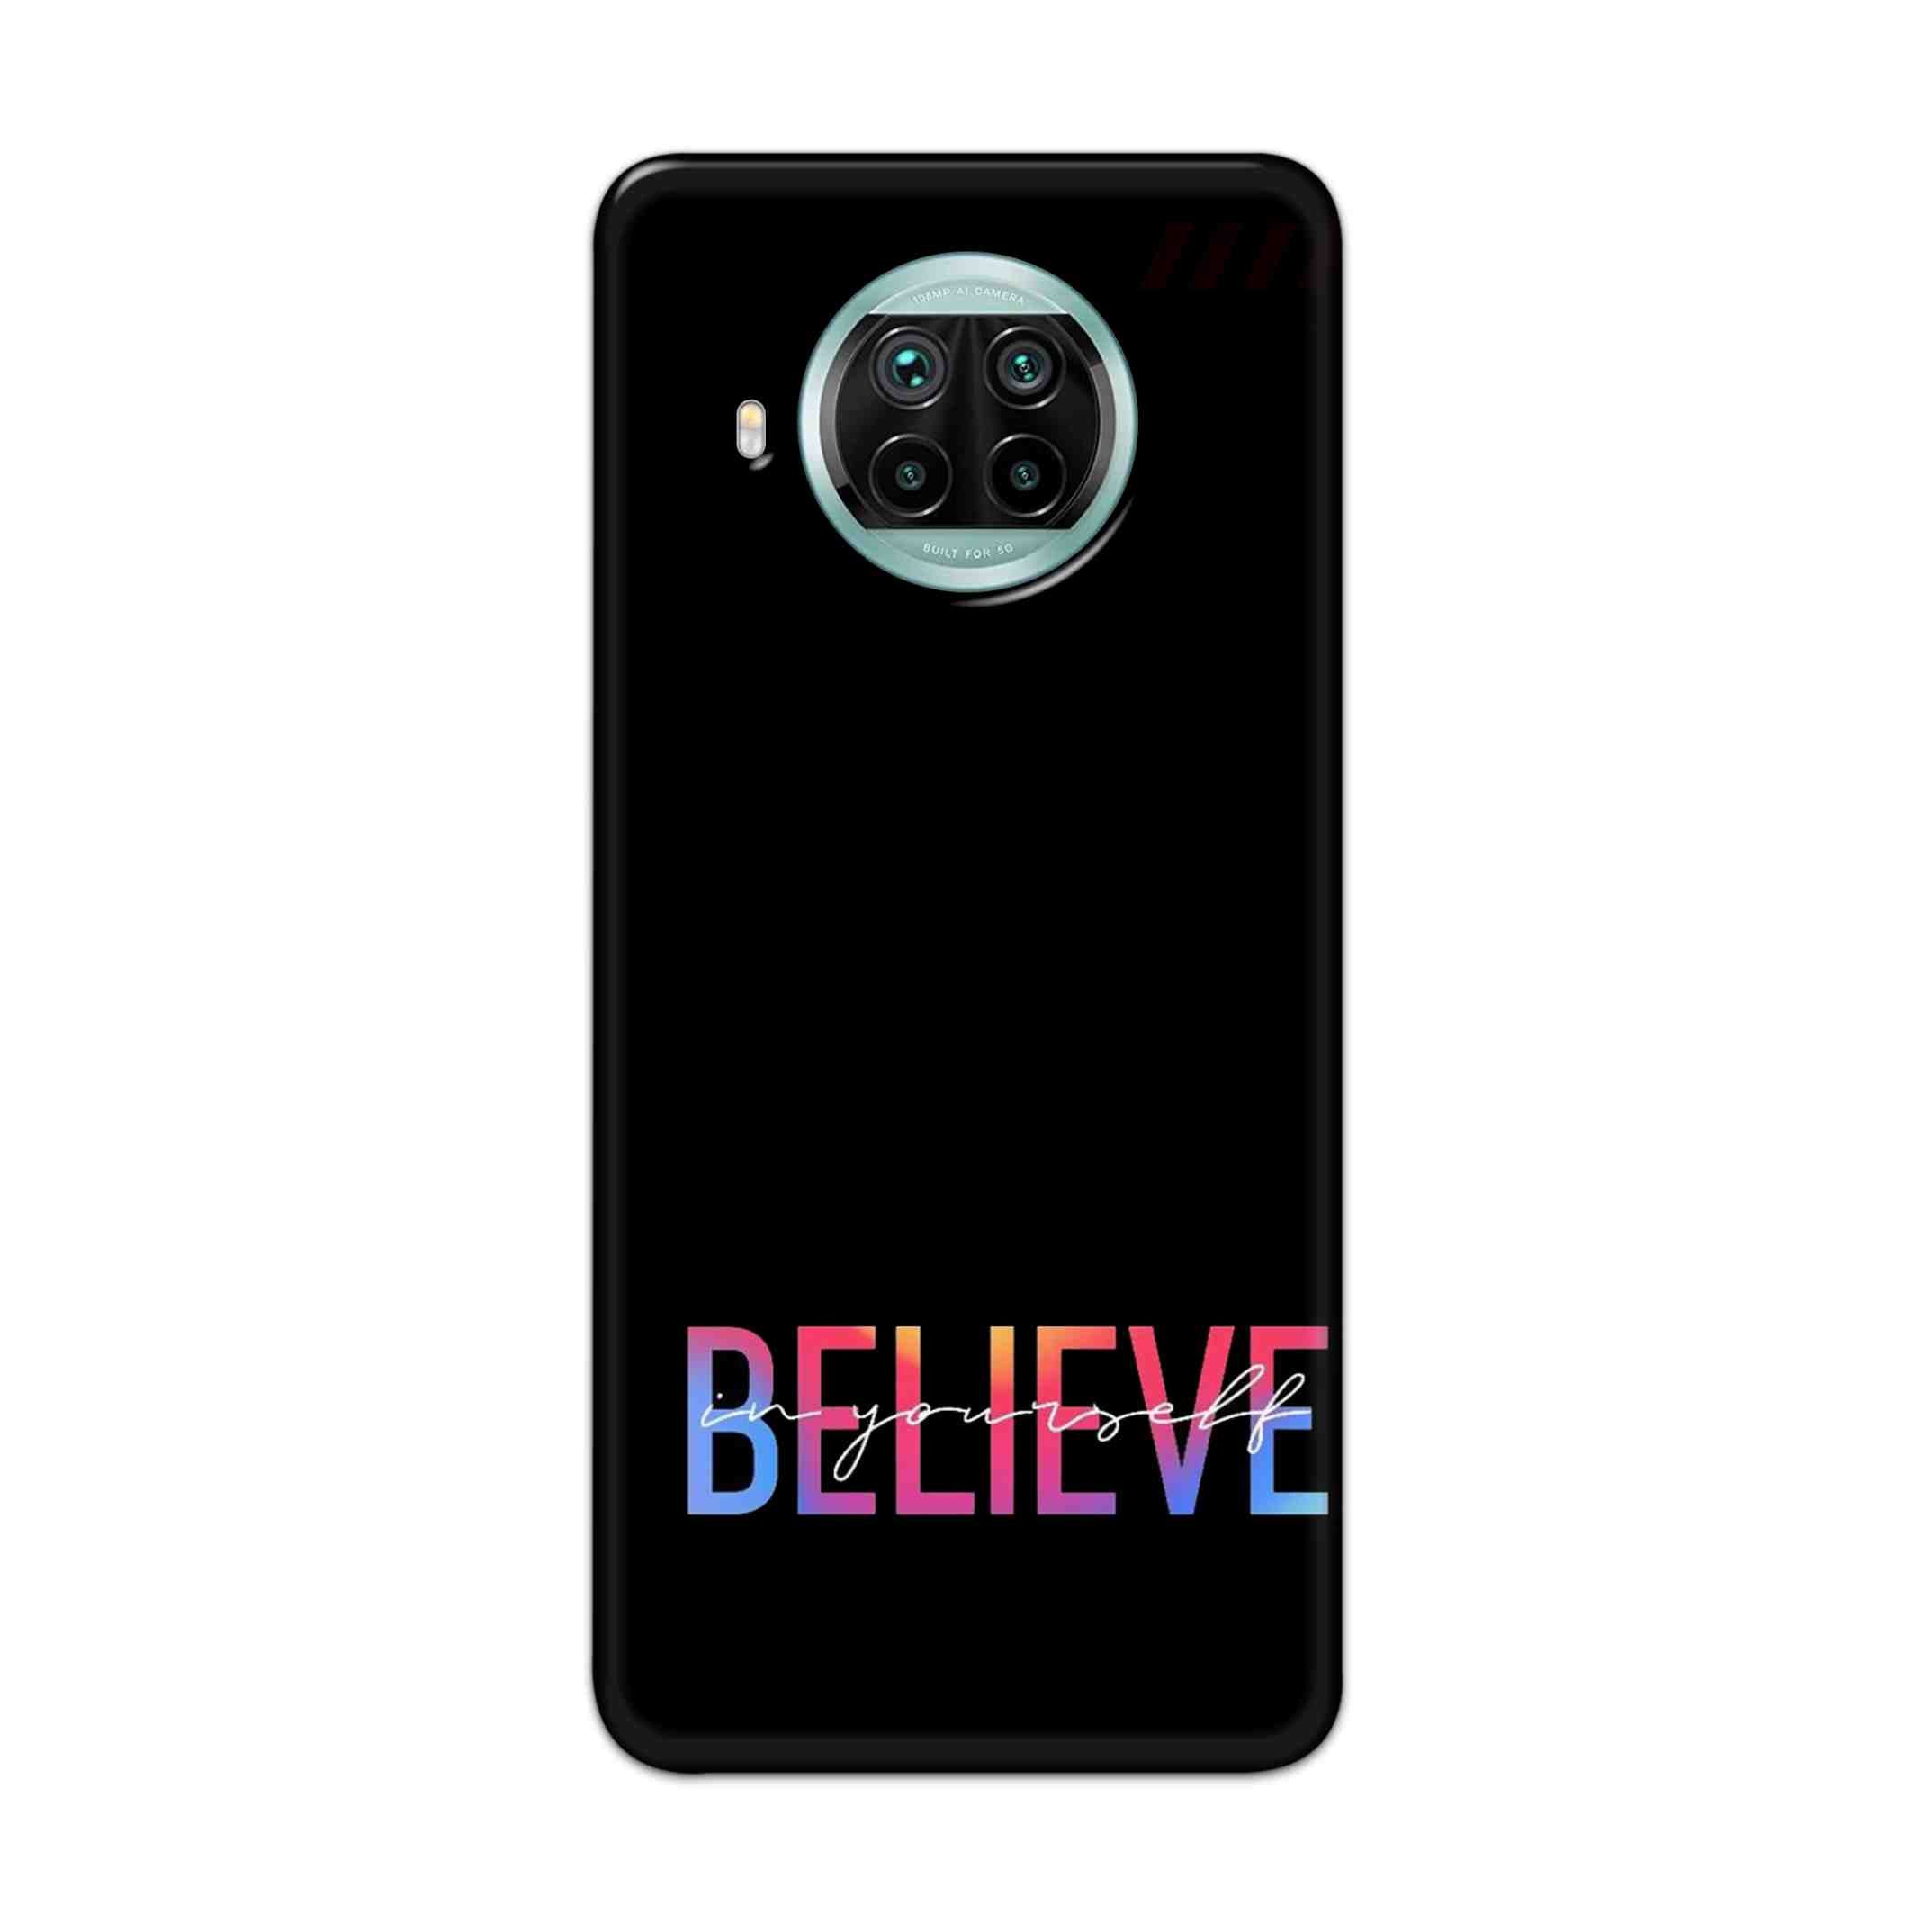 Buy Believe Hard Back Mobile Phone Case Cover For Xiaomi Mi 10i Online